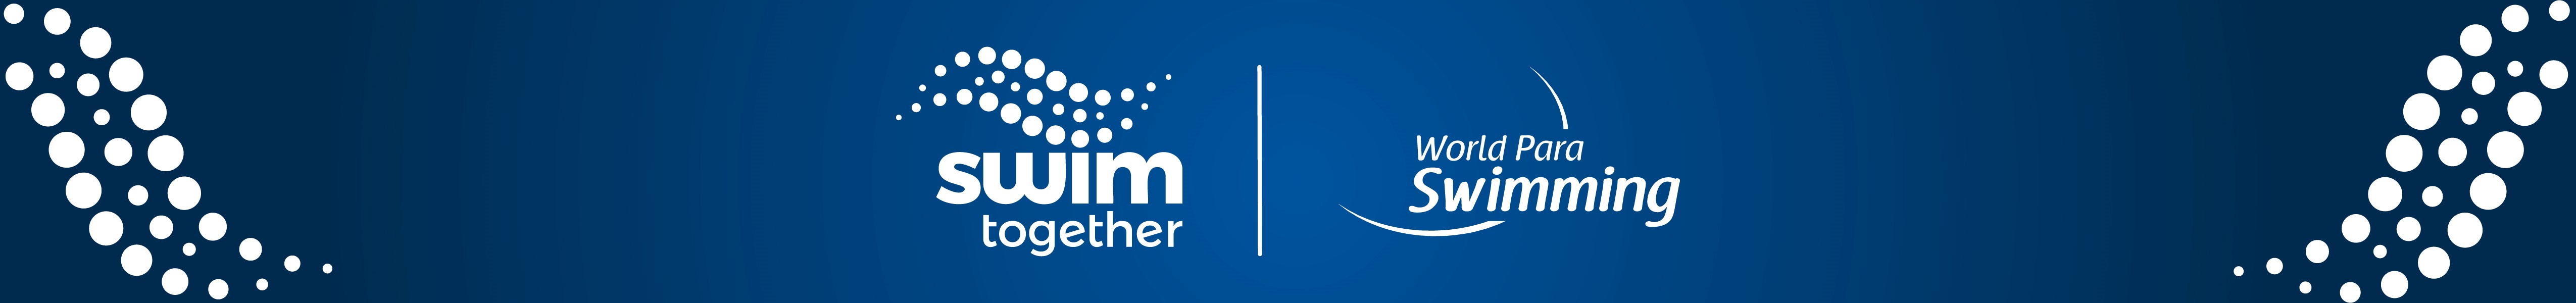 The banner of the World Para Swimming project Swim Together